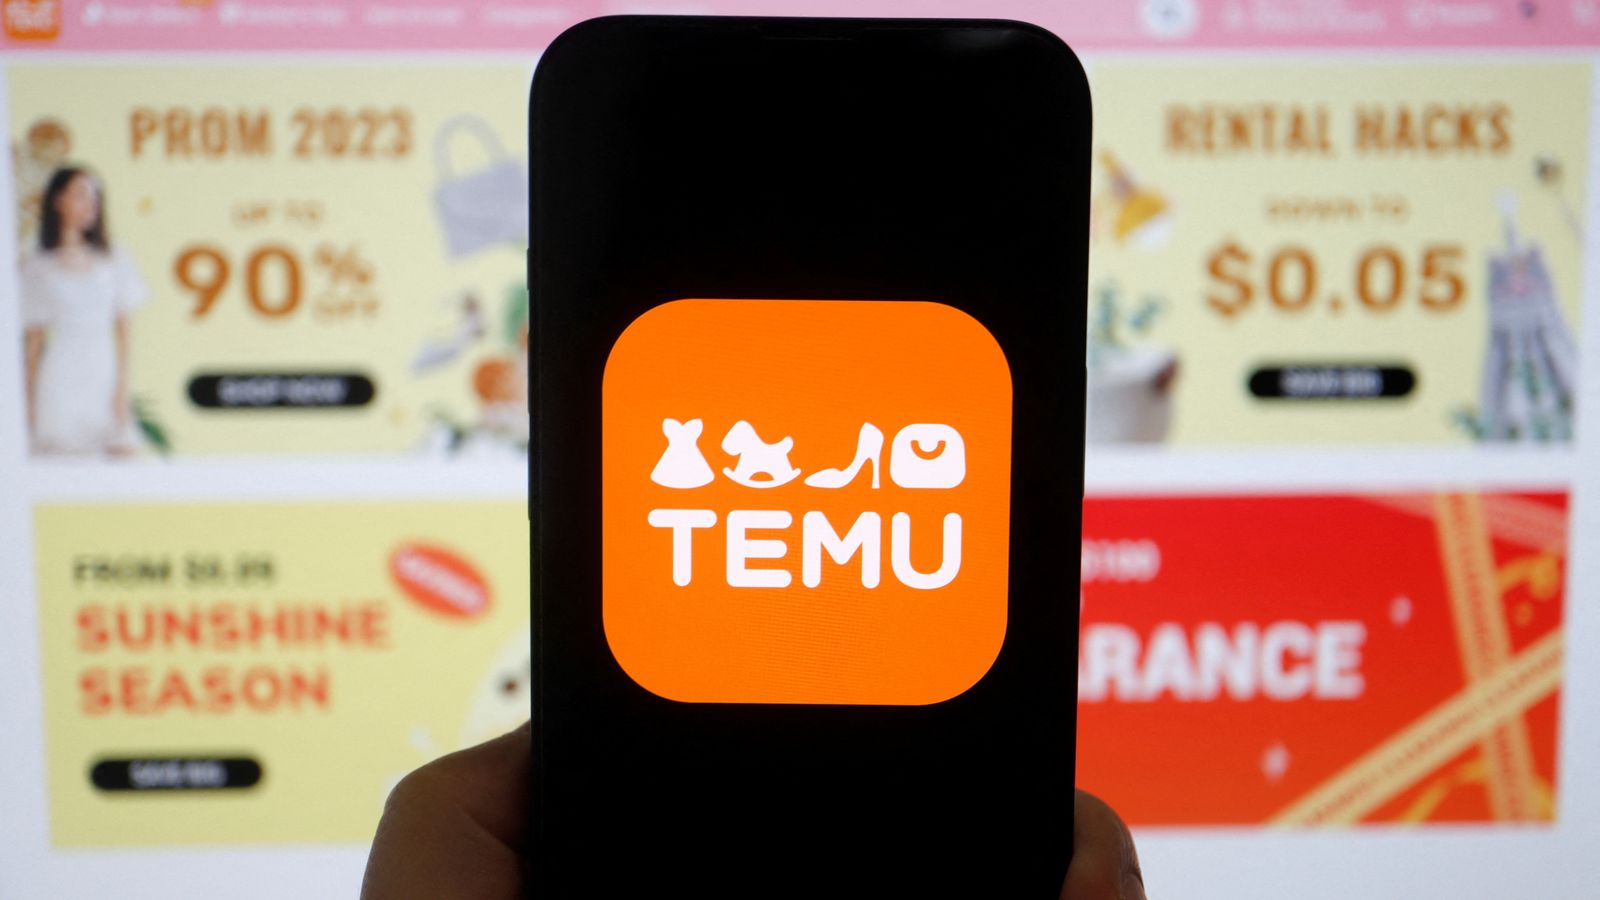 Temu faces legal challenge over ‘manipulative practices’ | Science & Tech News